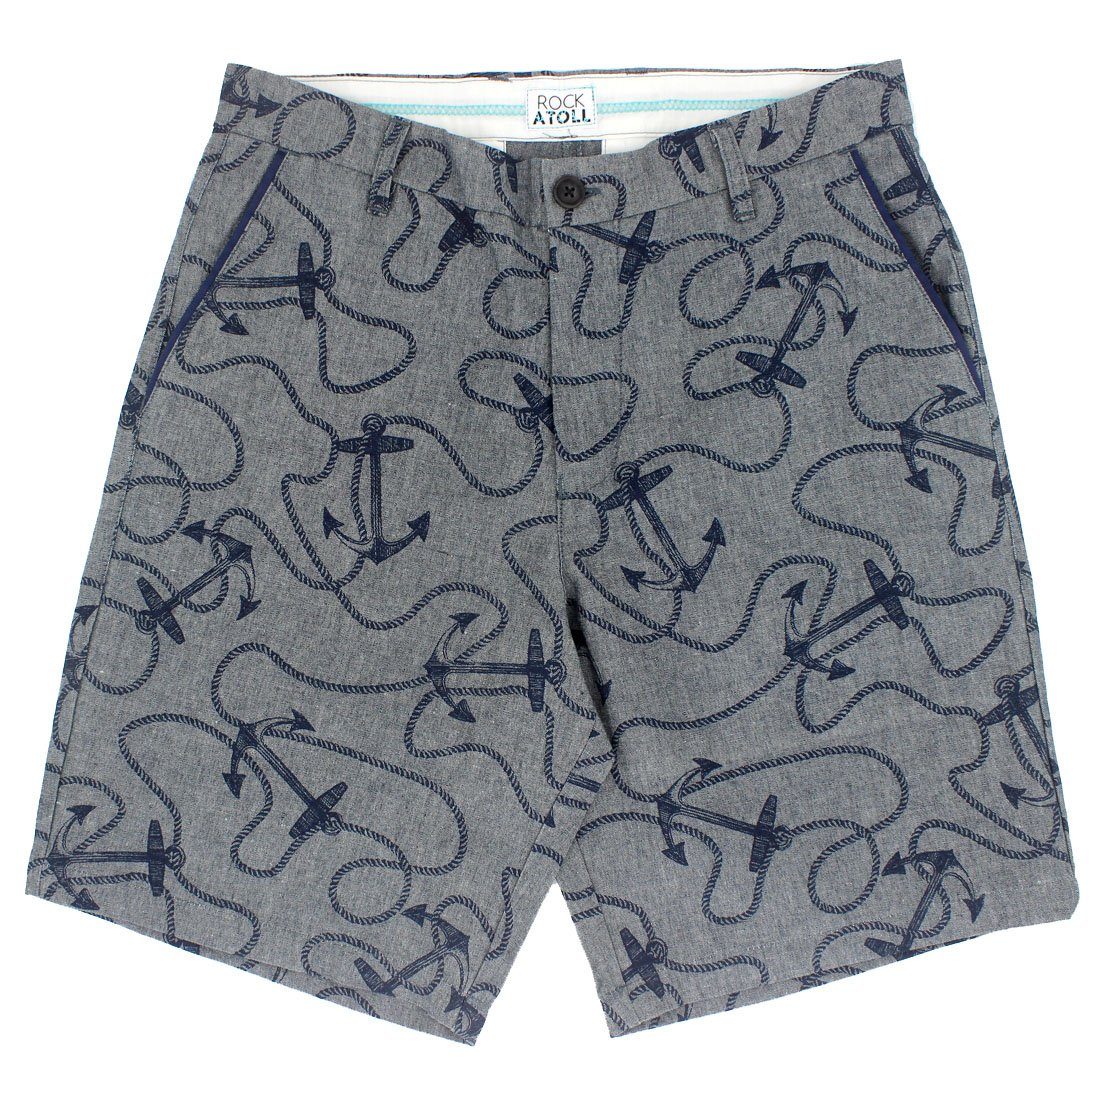 Ropes and Anchors All Over Print Flat Front Men's Shorts